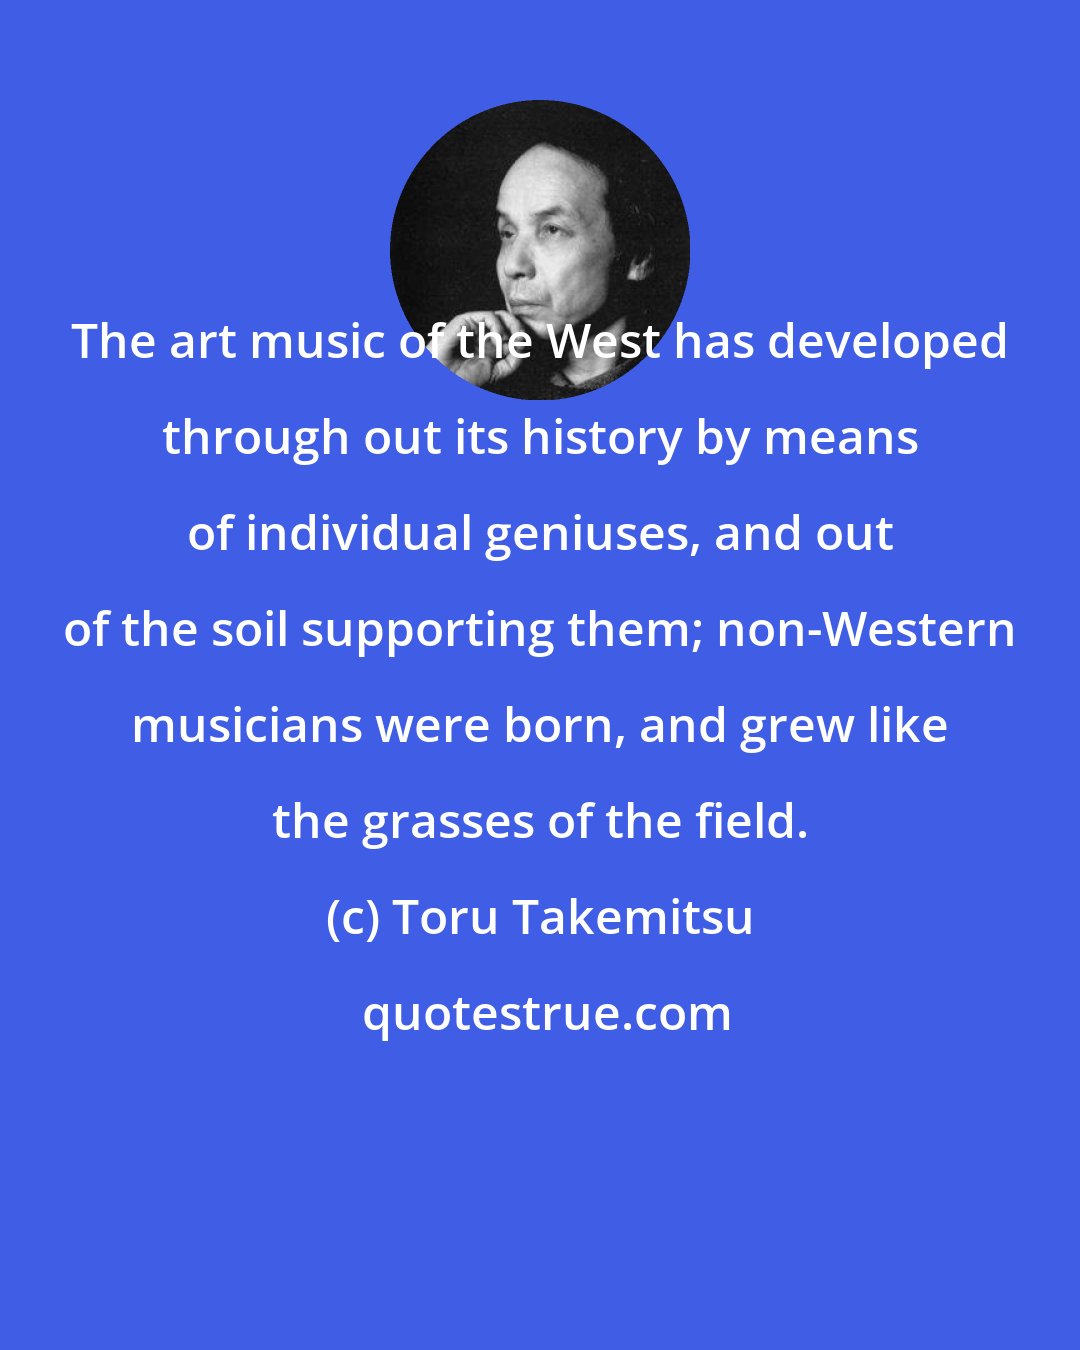 Toru Takemitsu: The art music of the West has developed through out its history by means of individual geniuses, and out of the soil supporting them; non-Western musicians were born, and grew like the grasses of the field.